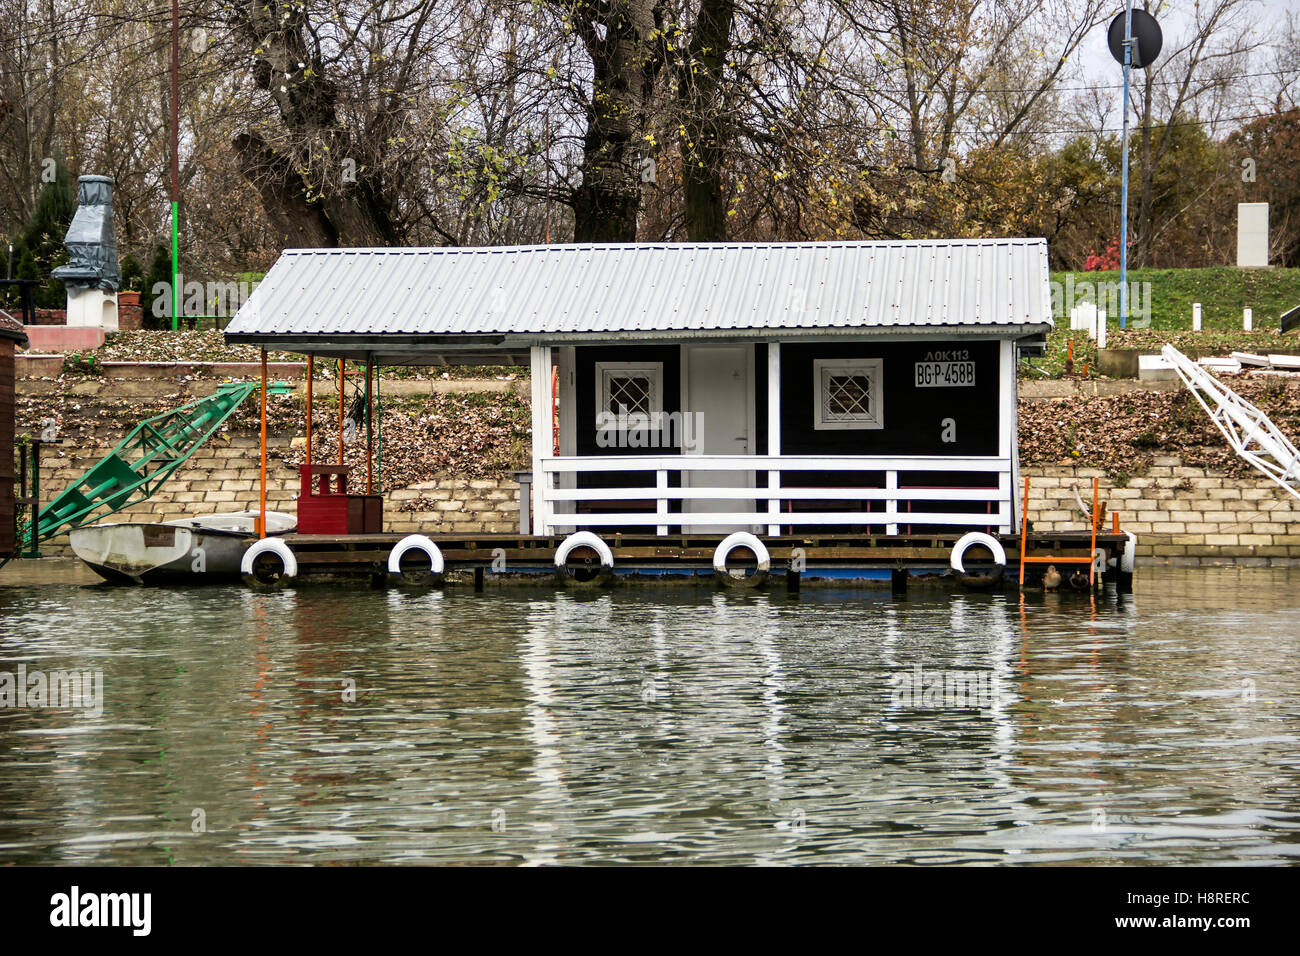 Sava river, Serbia - A raft house moored to the shoreline of Ada Medjica islet Stock Photo